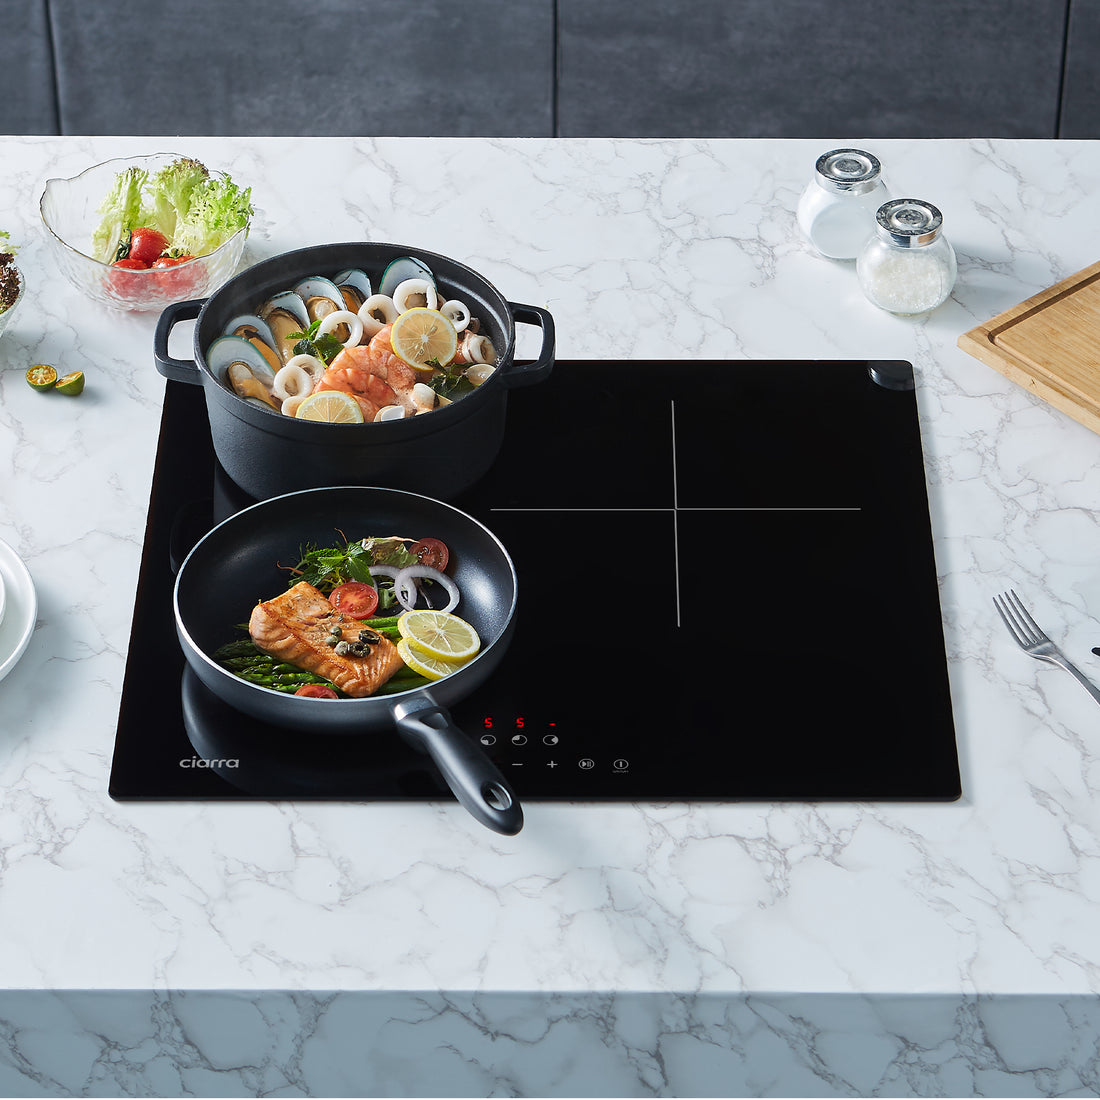 Advantages & Disadvantages of The Built-in Induction Hob